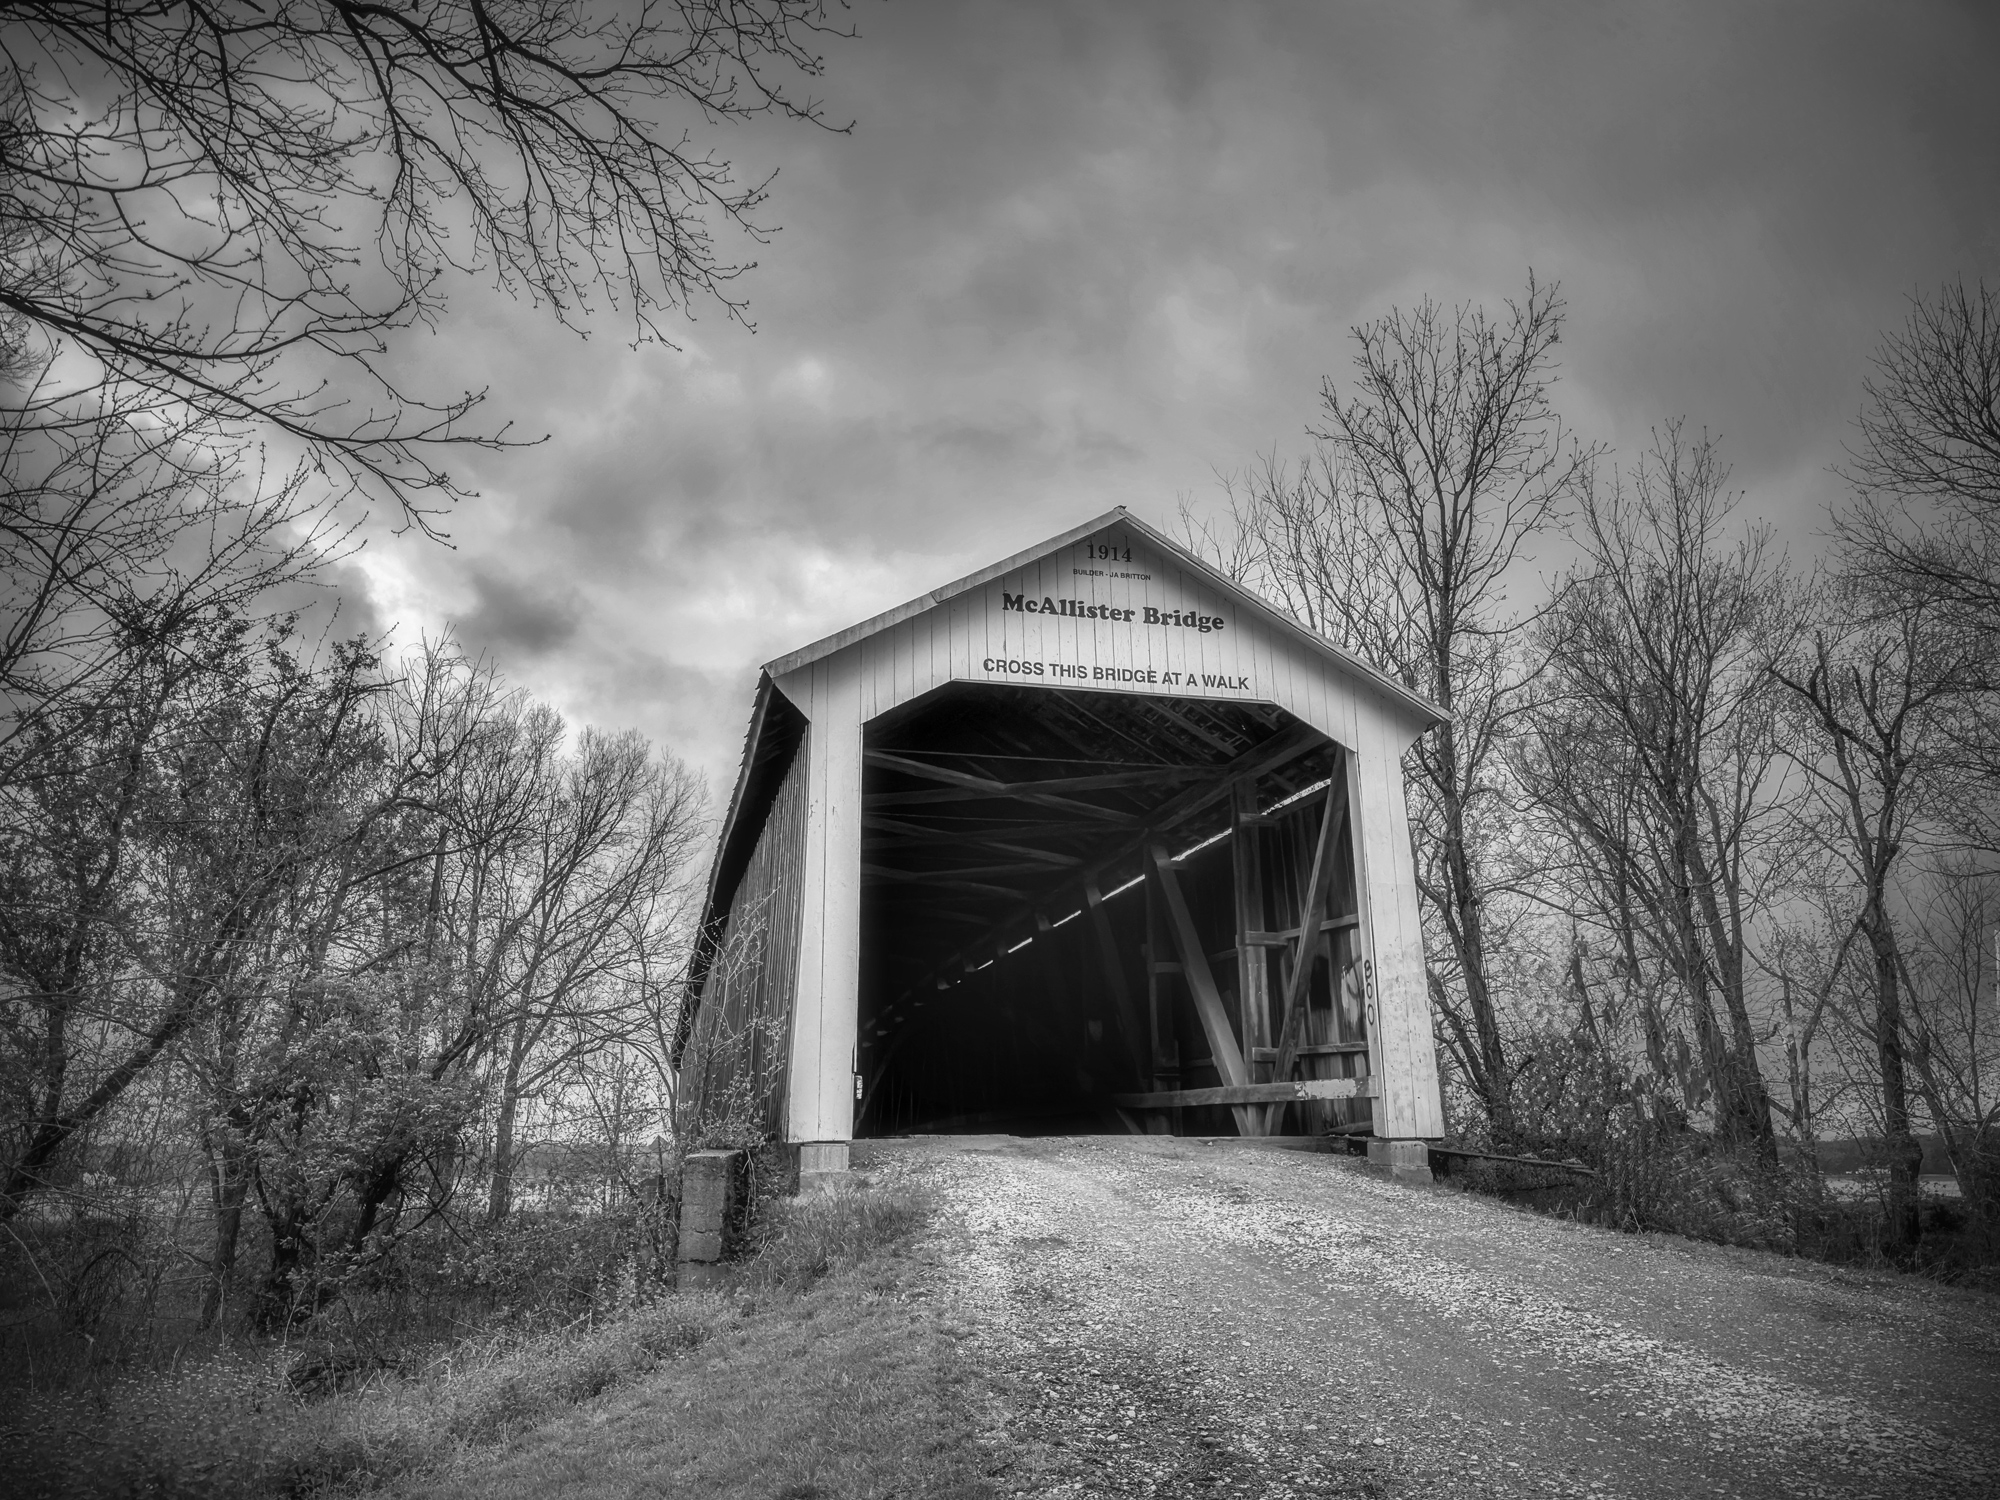 McAllister Bridge near Waveland, Indiana iPhone 14 Pro Max, 24mm, 48mp camera, processed in Lightroom Mobile and Dramatic Black and White. 